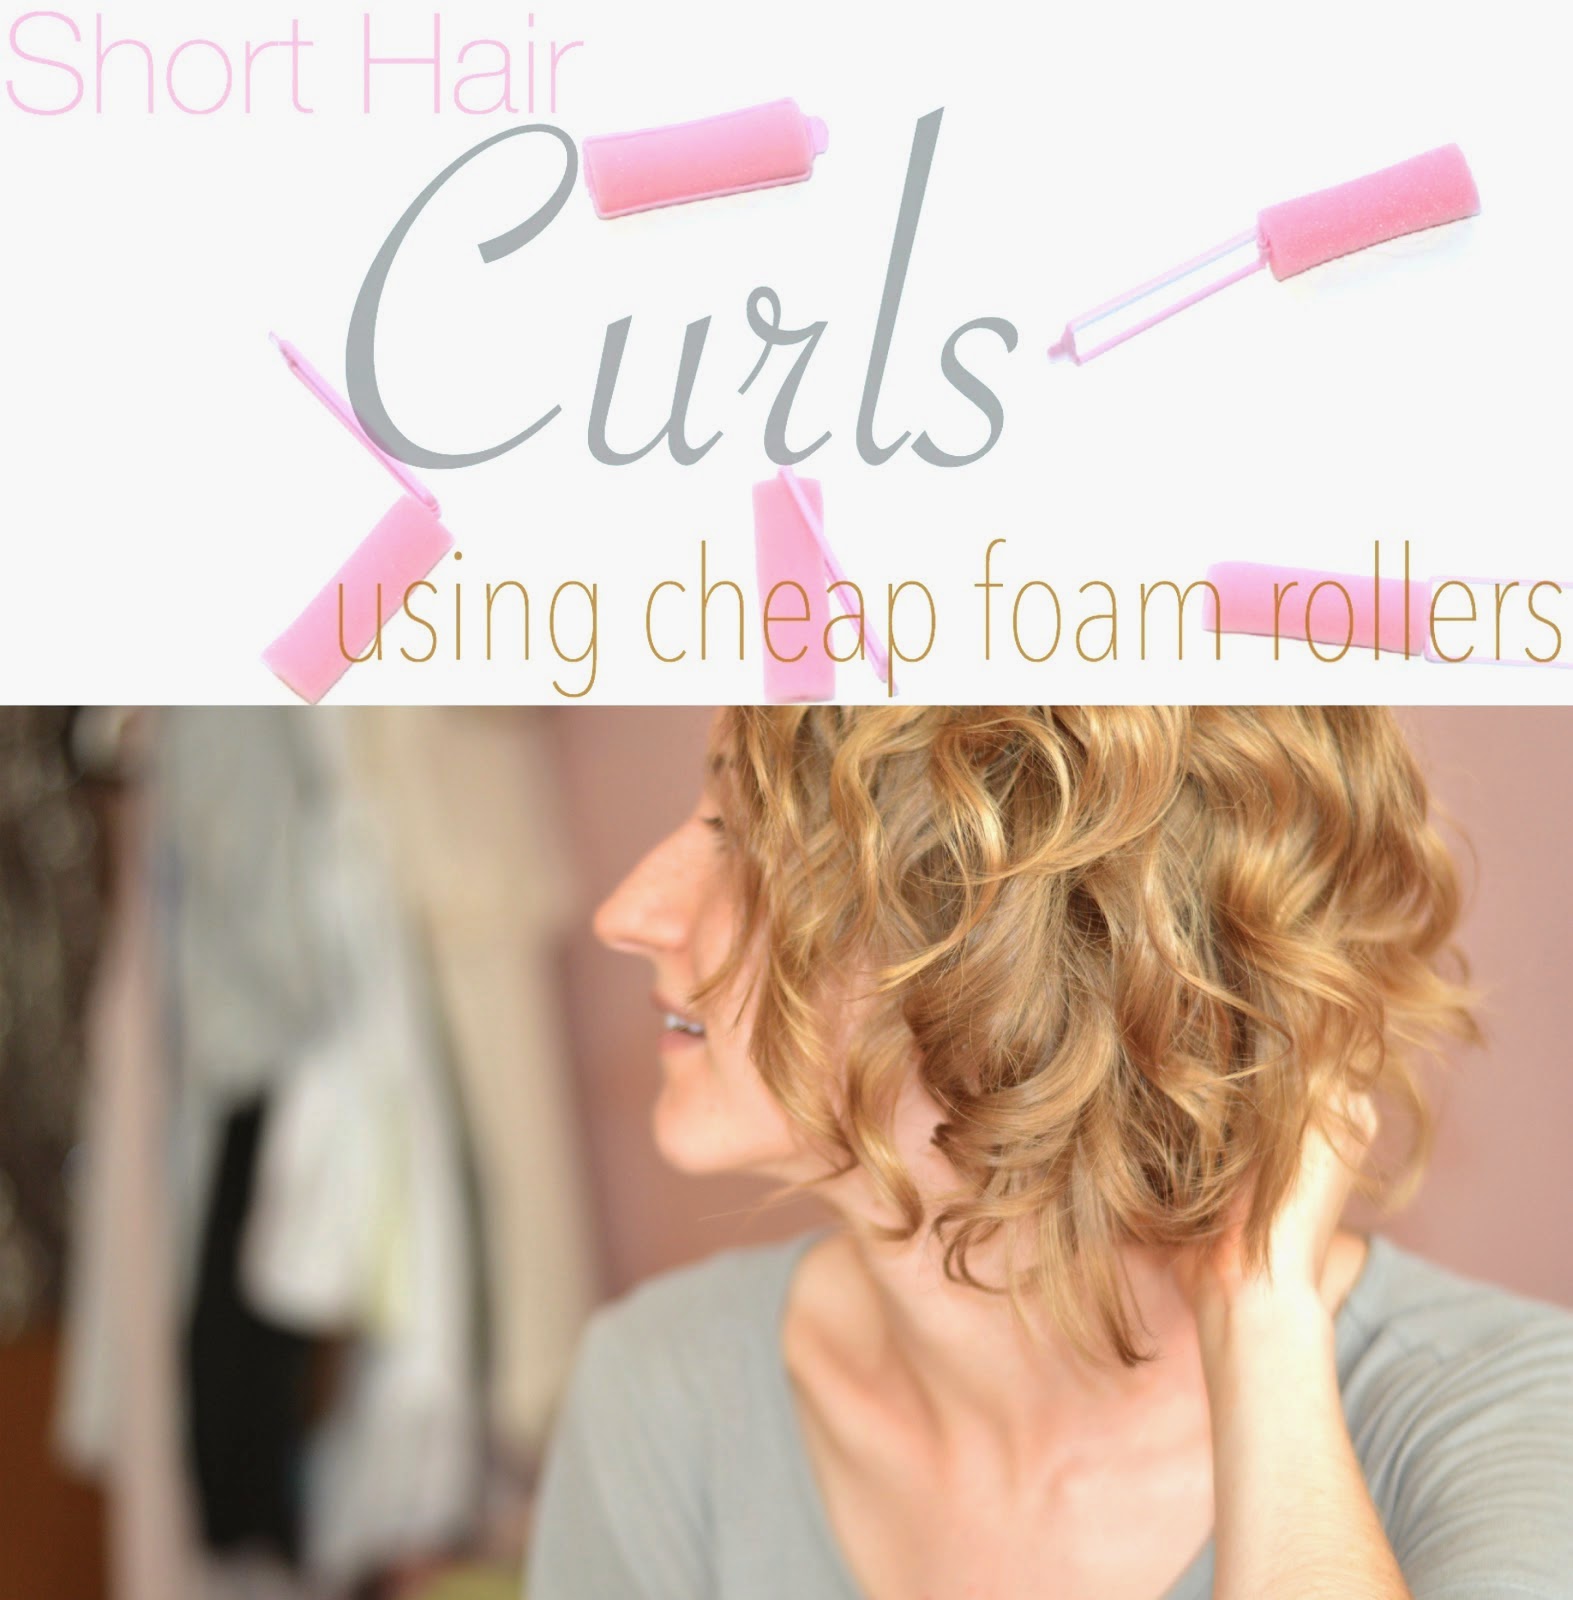 Howto Curl Short Hair Using Cheap Foam Rollers Classically Contemporary